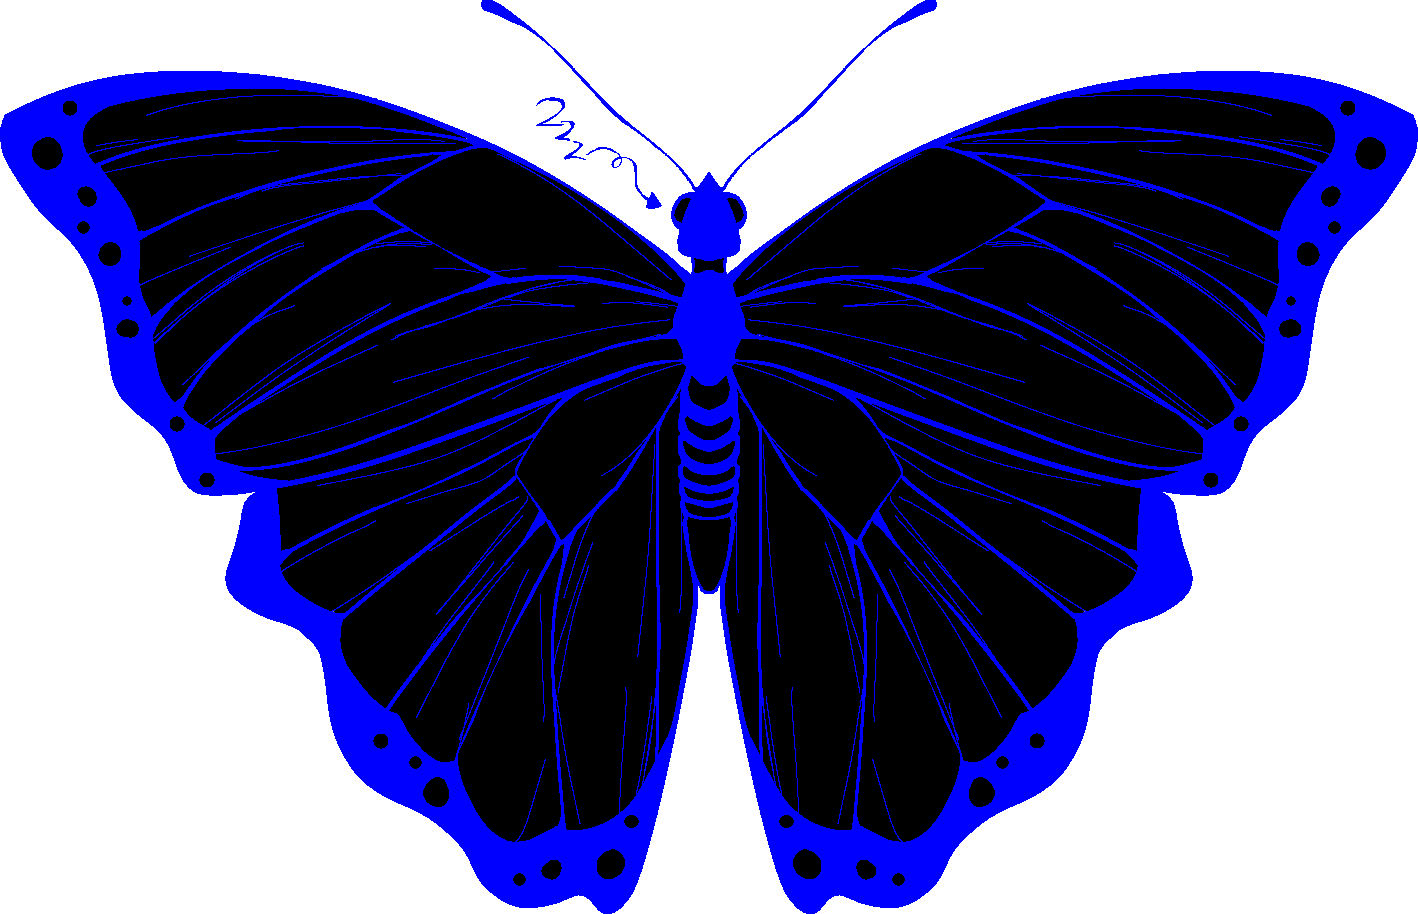 A morpho butterfly meant to represent the webmaster.